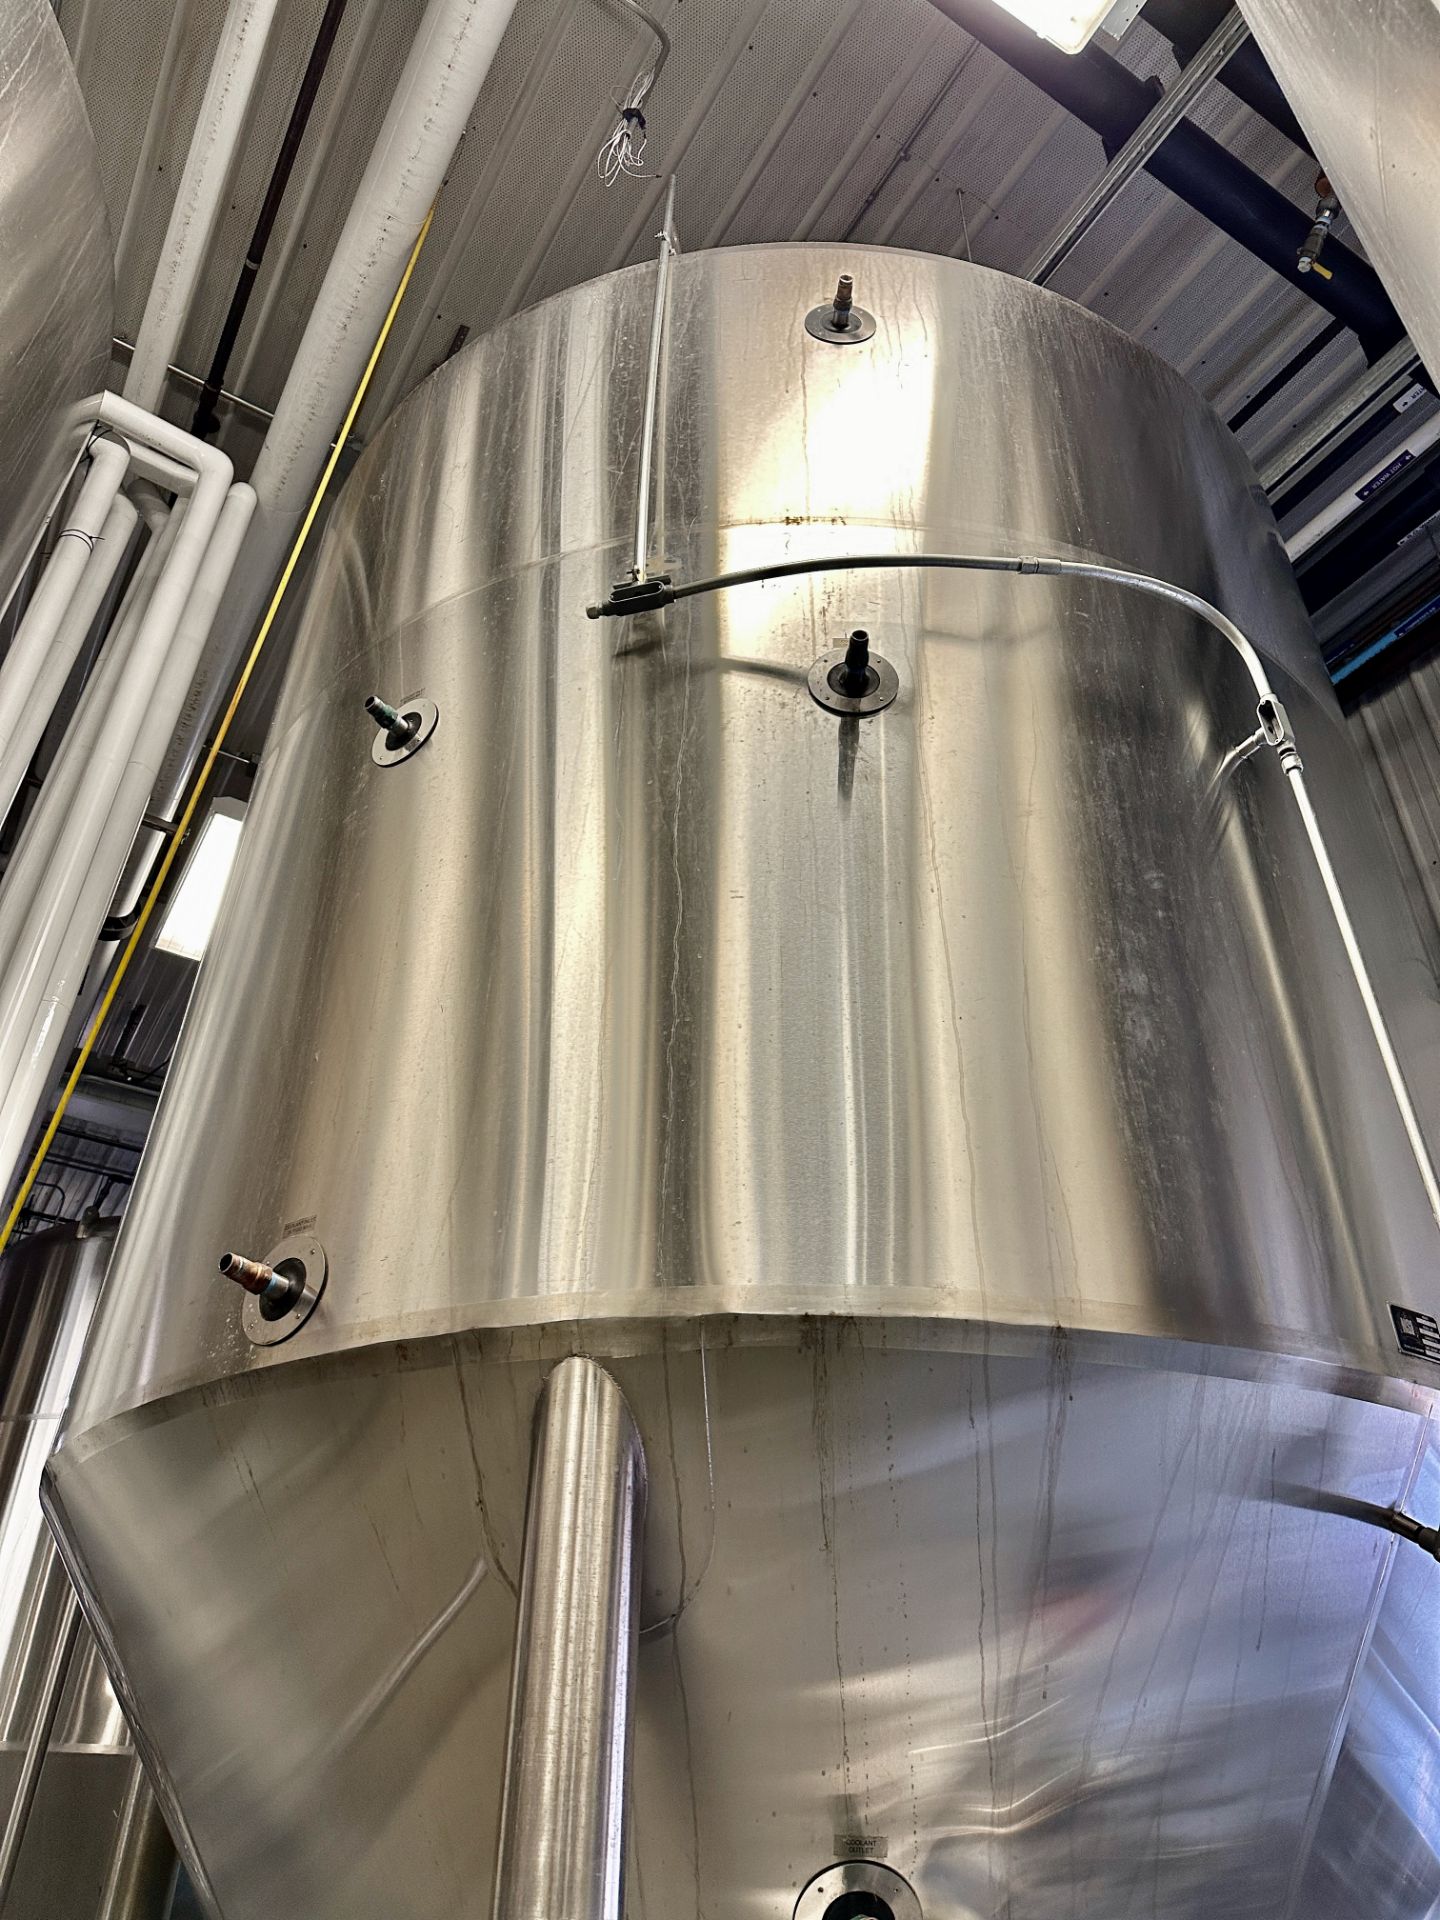 2015 NSI 150 BBL FV or 5,500 Gal Max Capacity Jacketed Fermentation Tank, Glycol Jacketed - Image 5 of 9